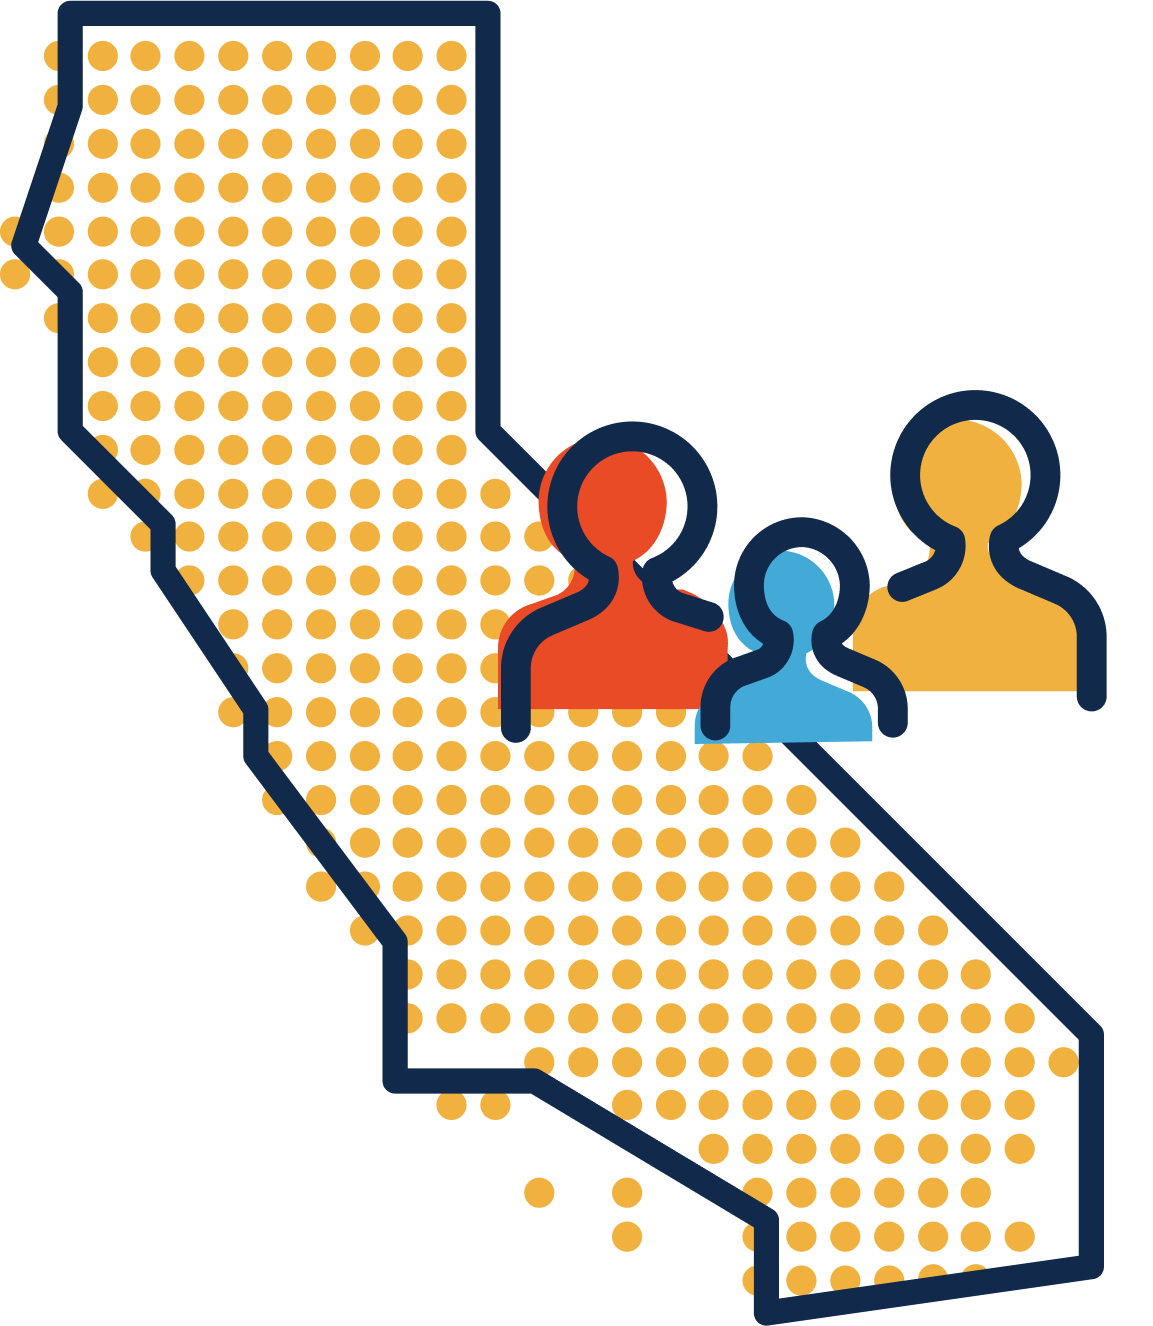 Graphic illustration of the state of California with yellow dots filling the outline and the outlines of three people to the right.